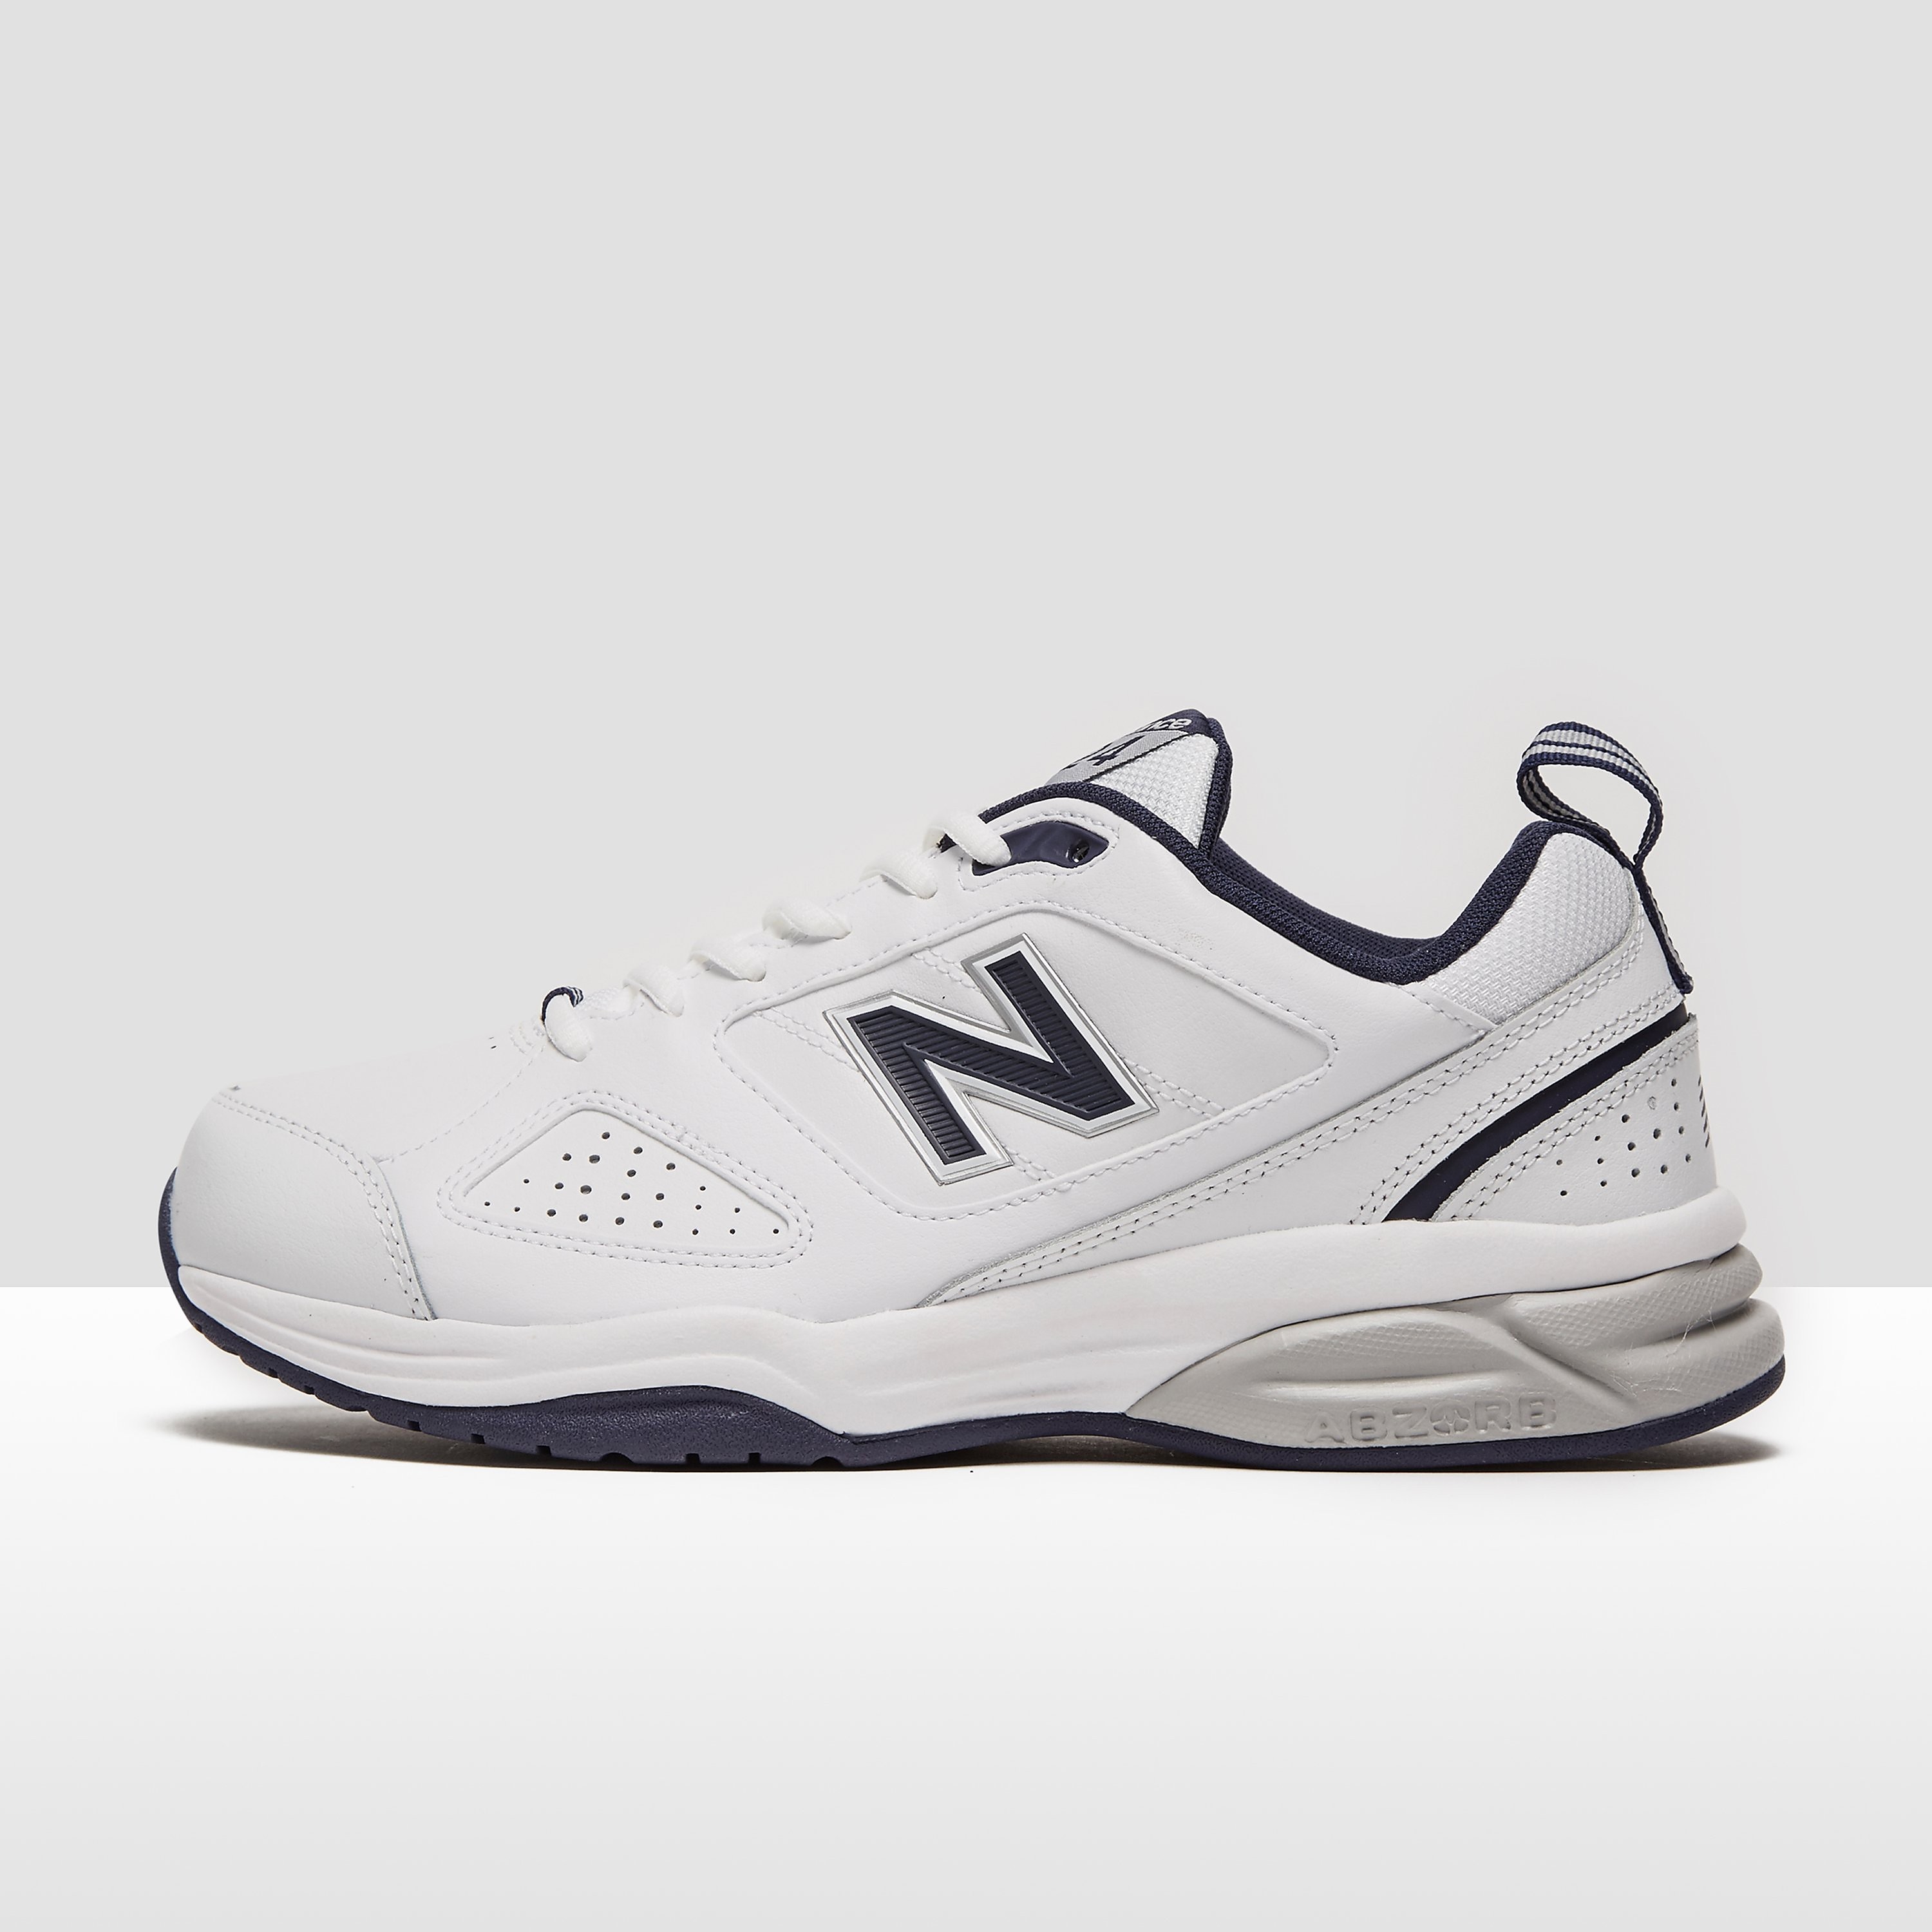 New Balance 624 V4 Leather Mens Trainers White | FOOTY.COM